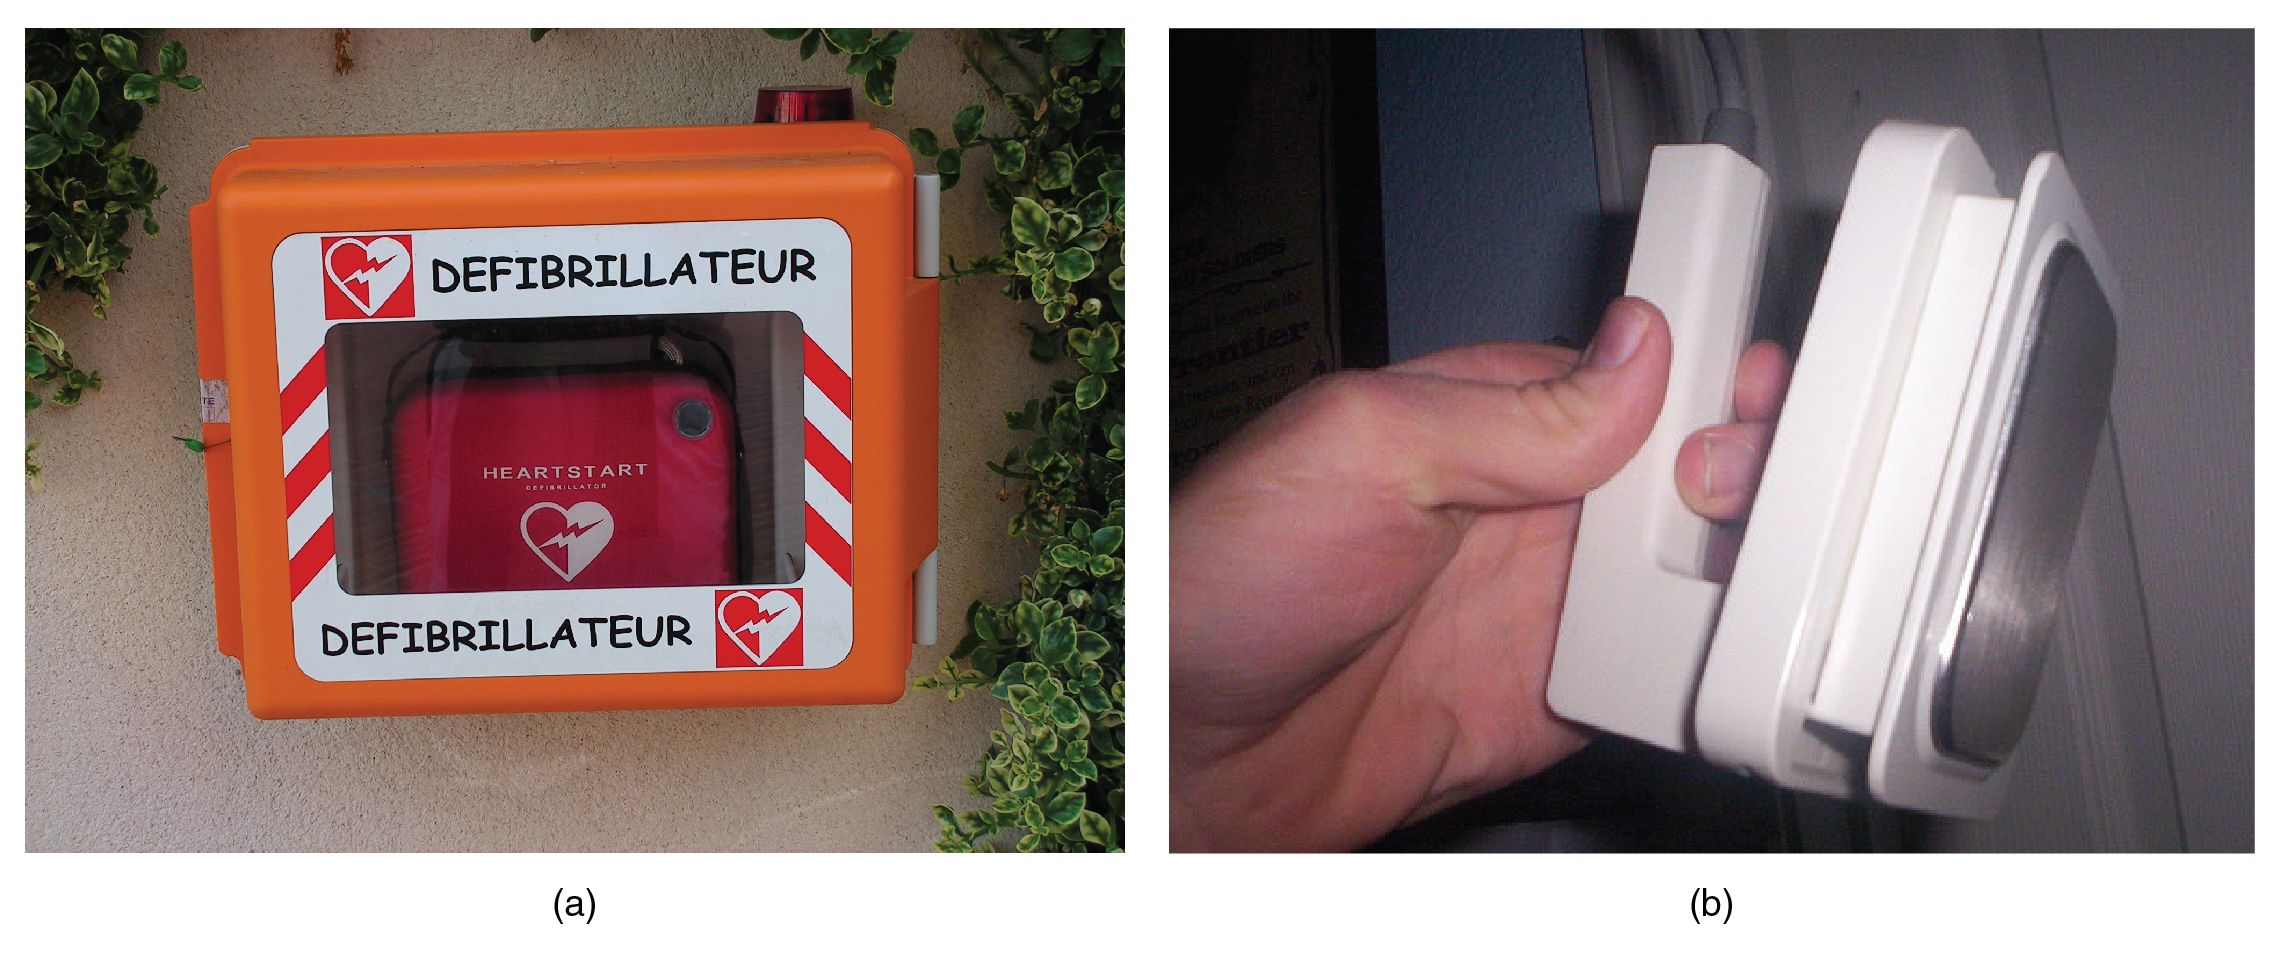 In this figure two photographs of defibrillators are shown.